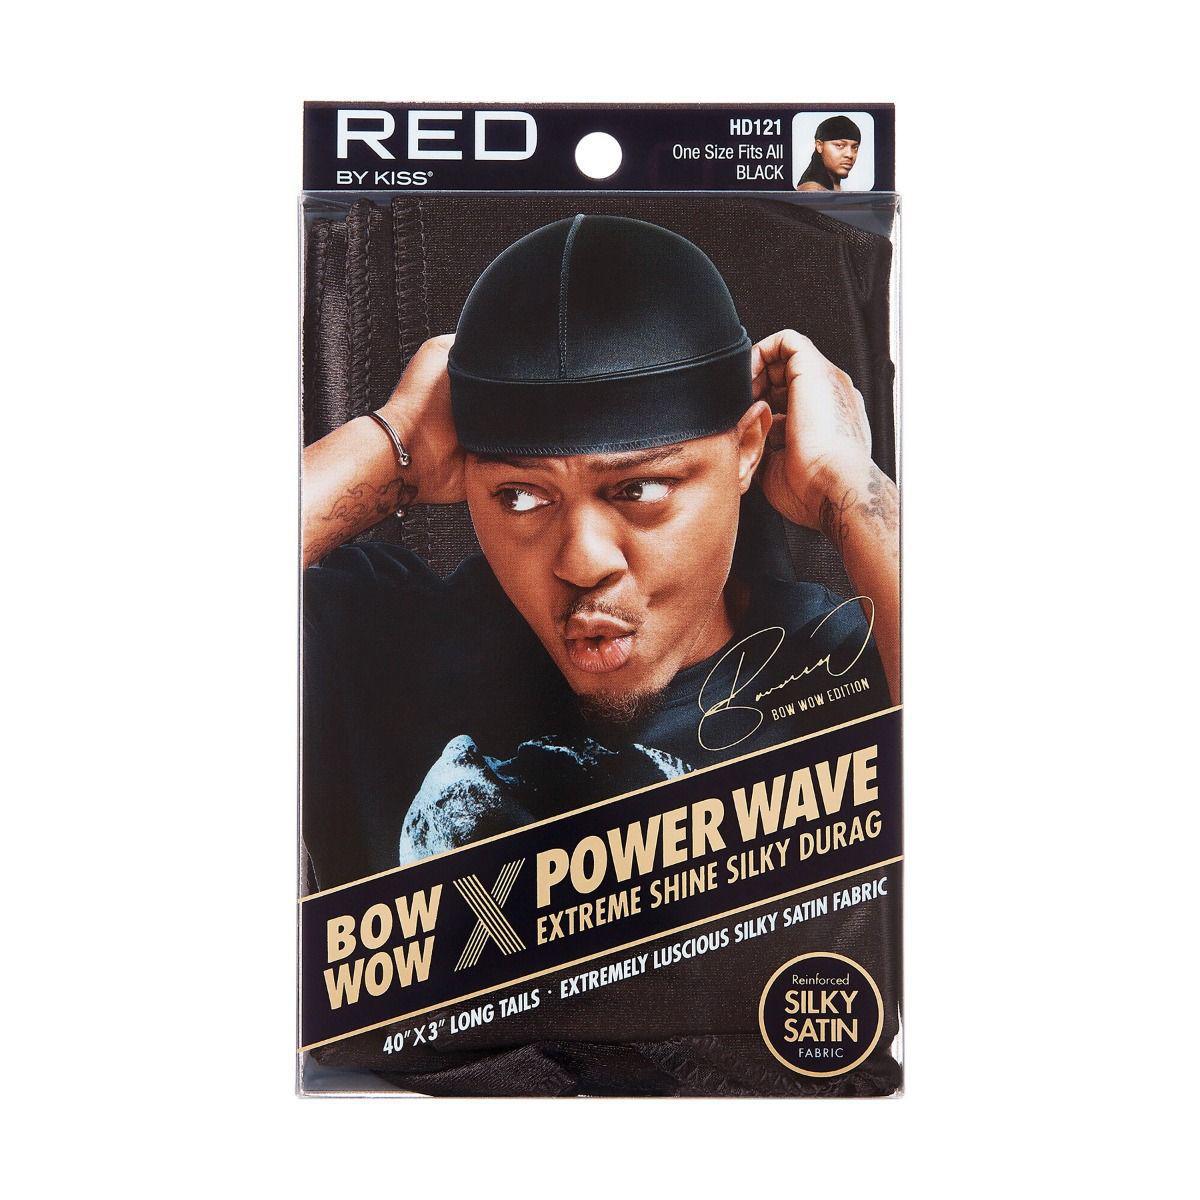 RED by Kiss Powerwave Extreme Silky Durag